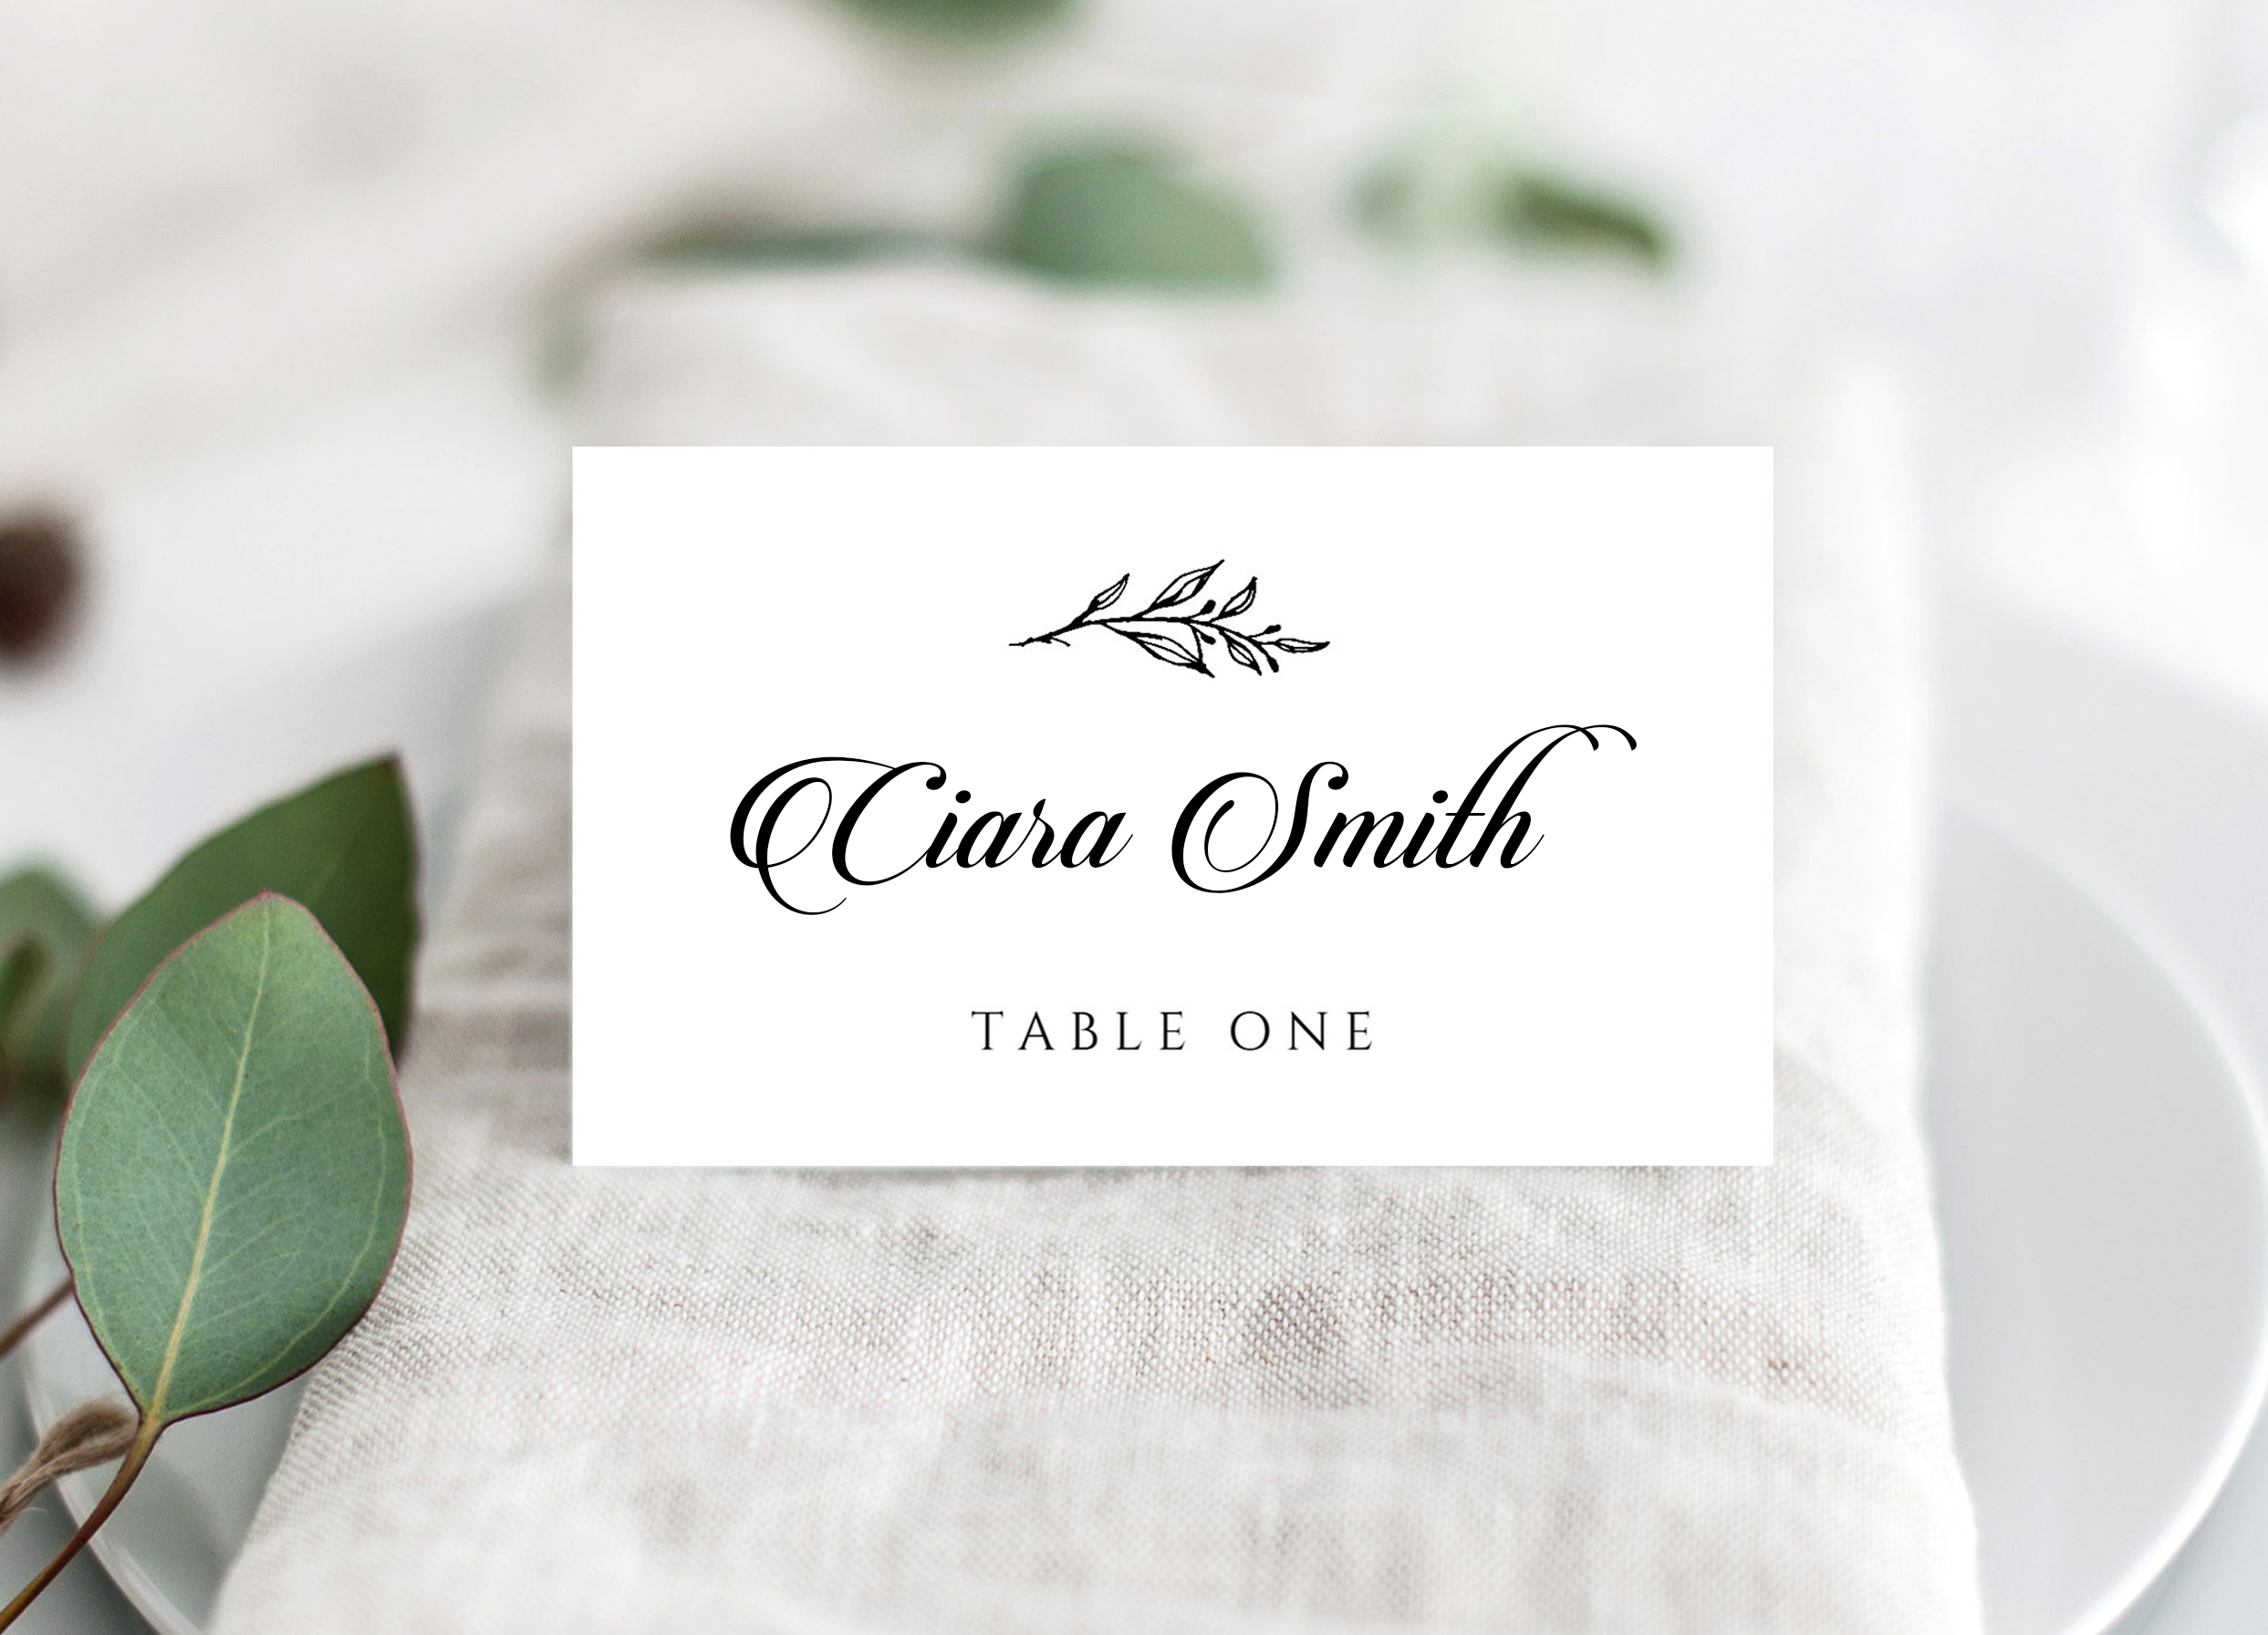 Table Plans & Name Cards Ireland